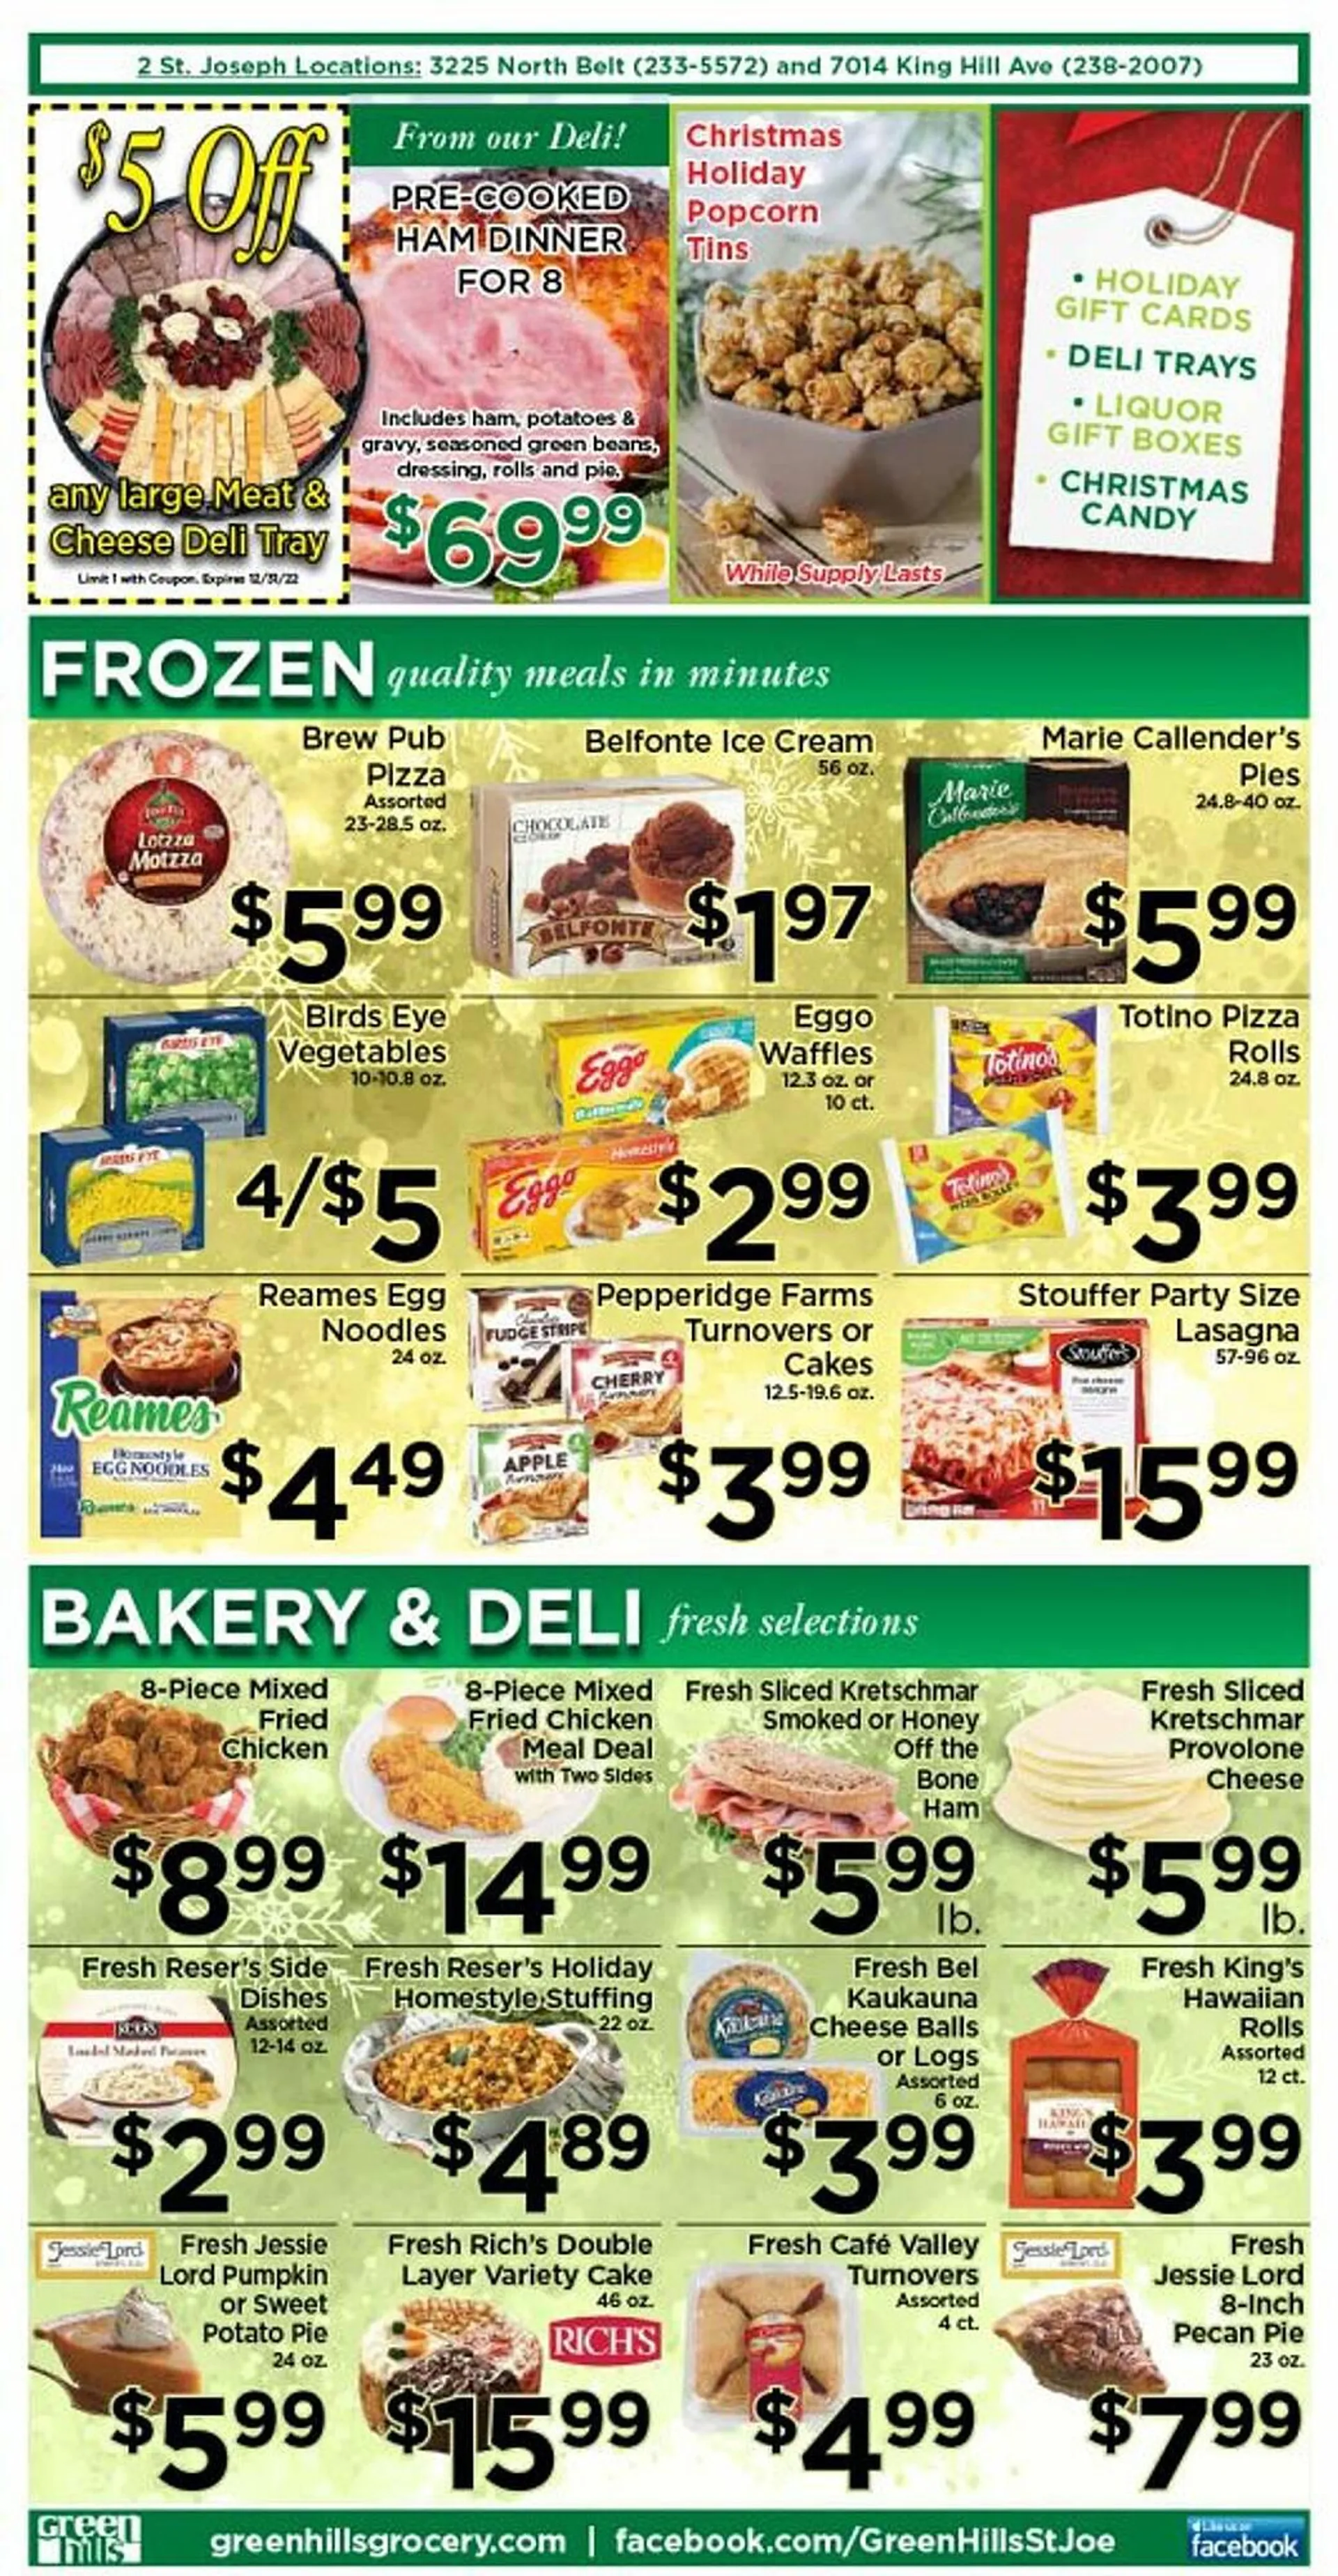 Green Hills Grocery ad - 3